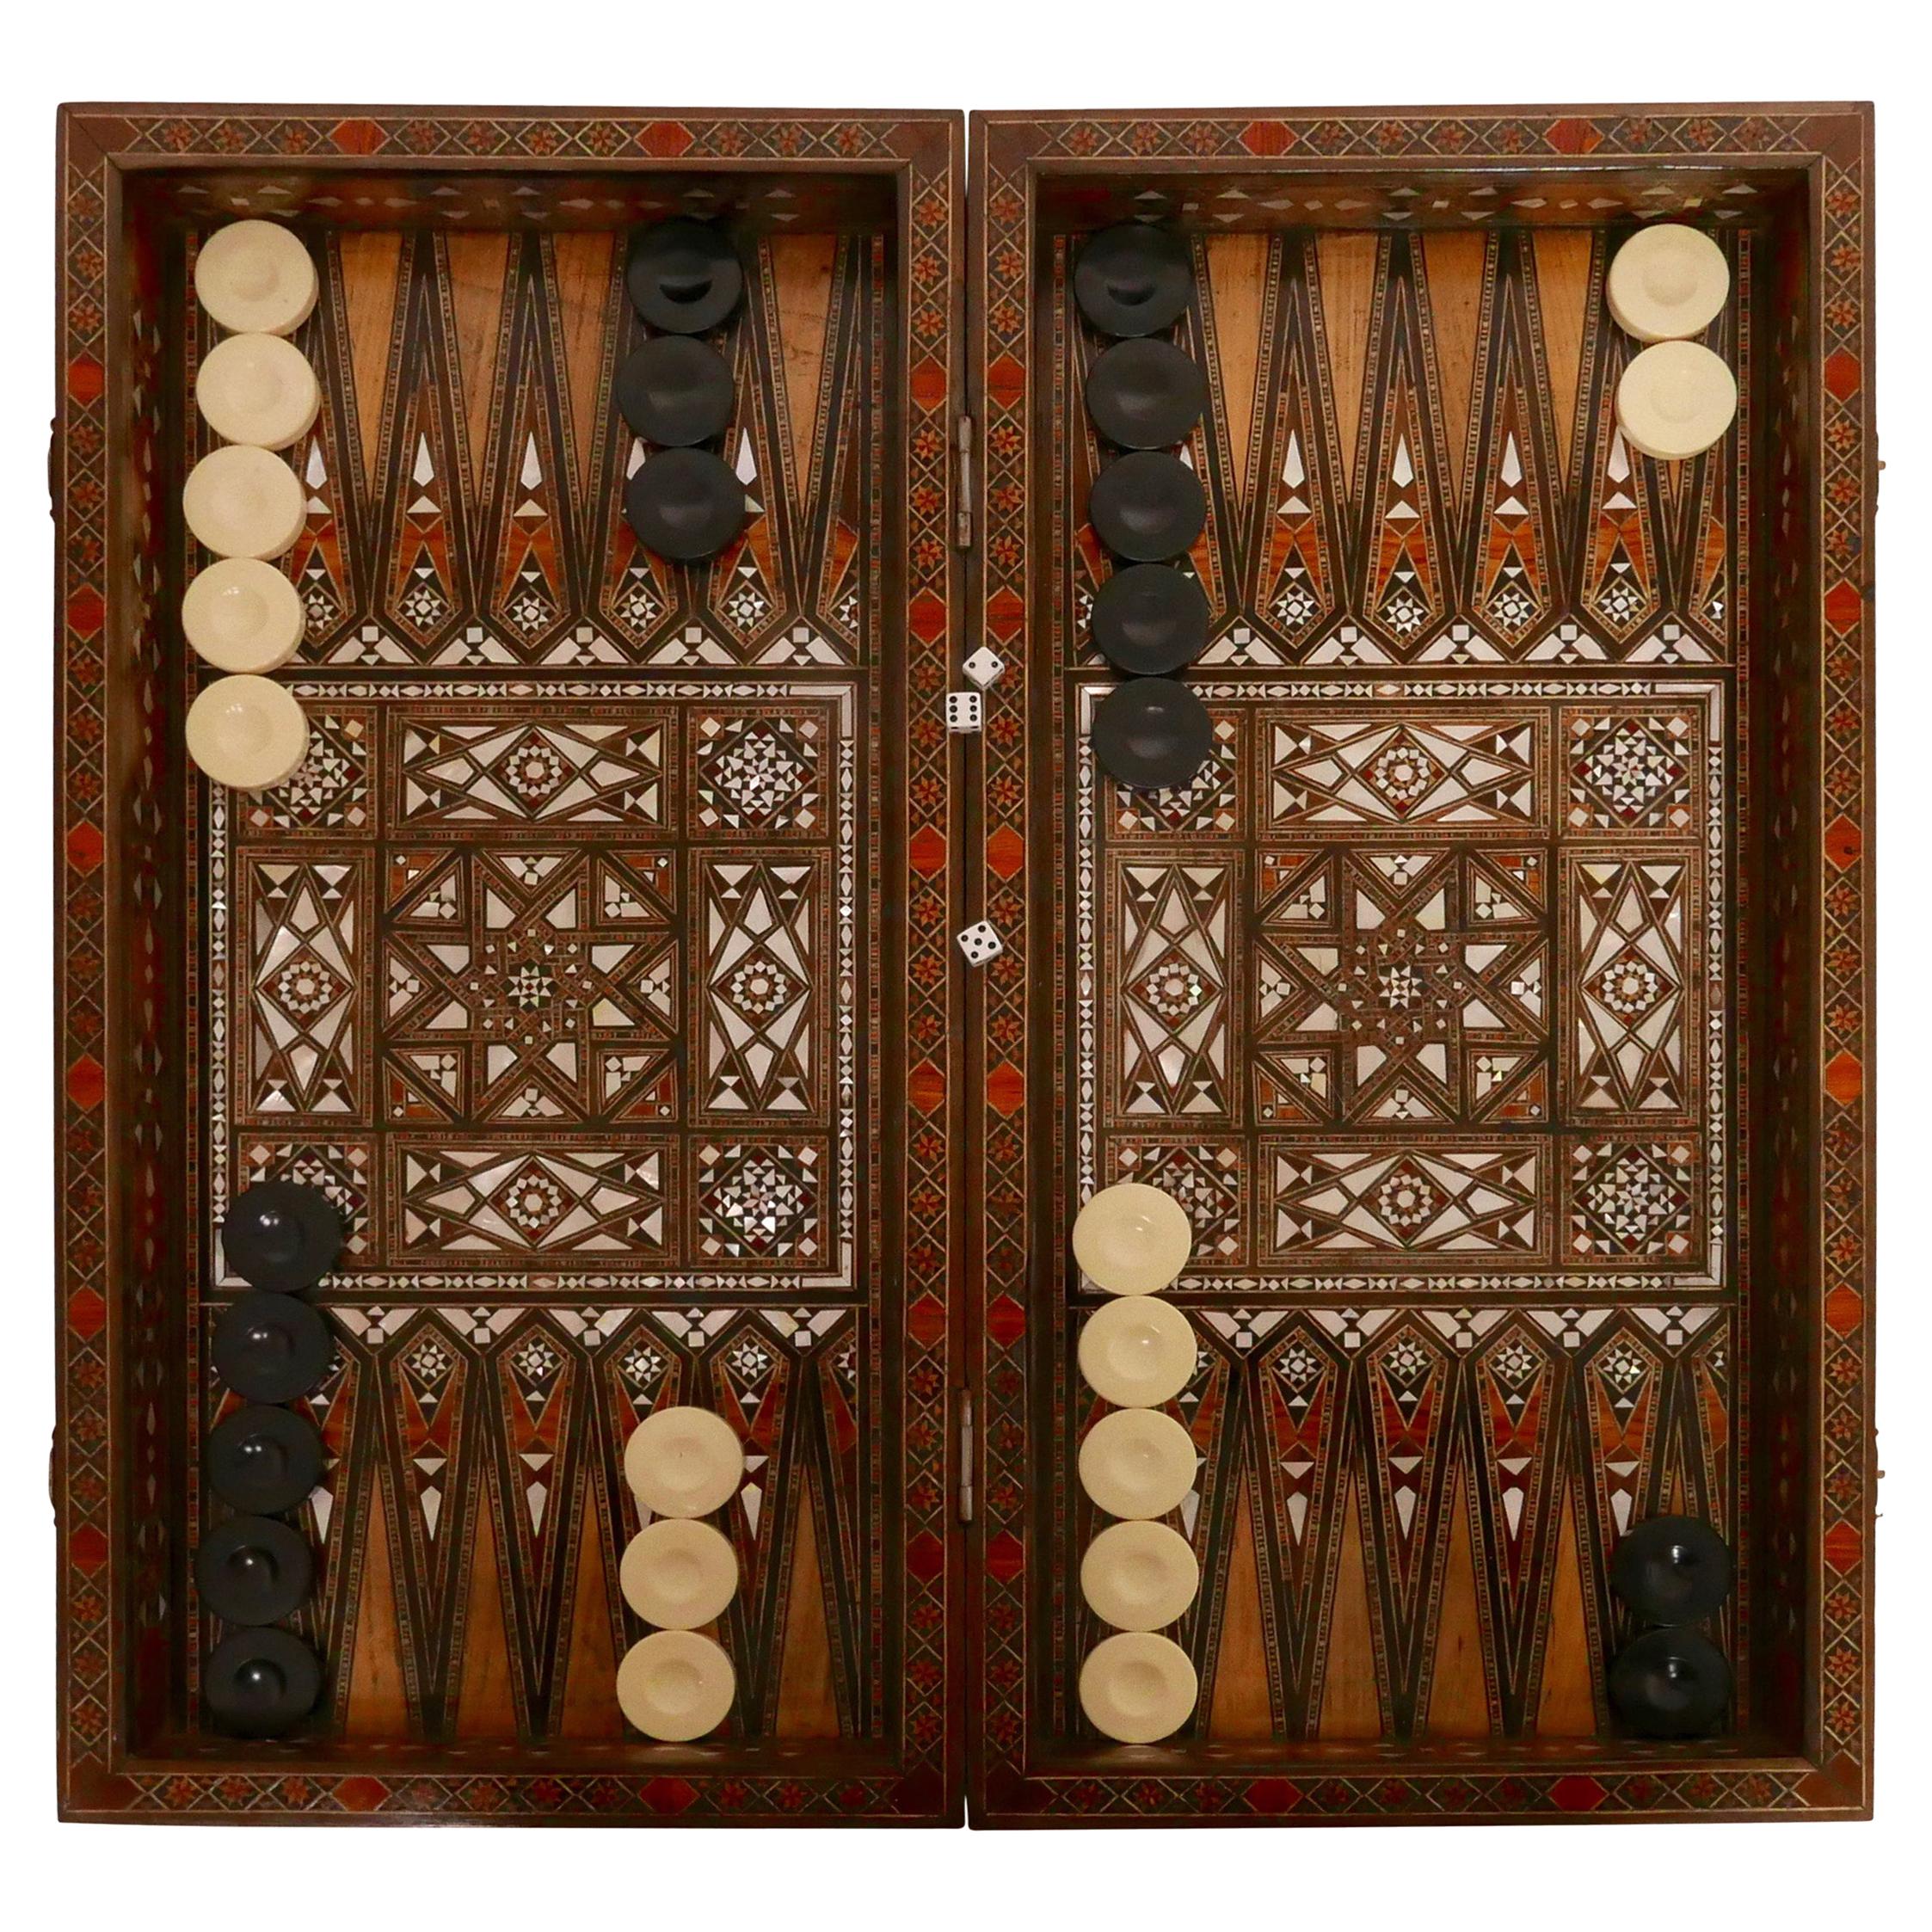 Syrian Inlaid Marquetry Mosaic Backgammon and Chess Game Box